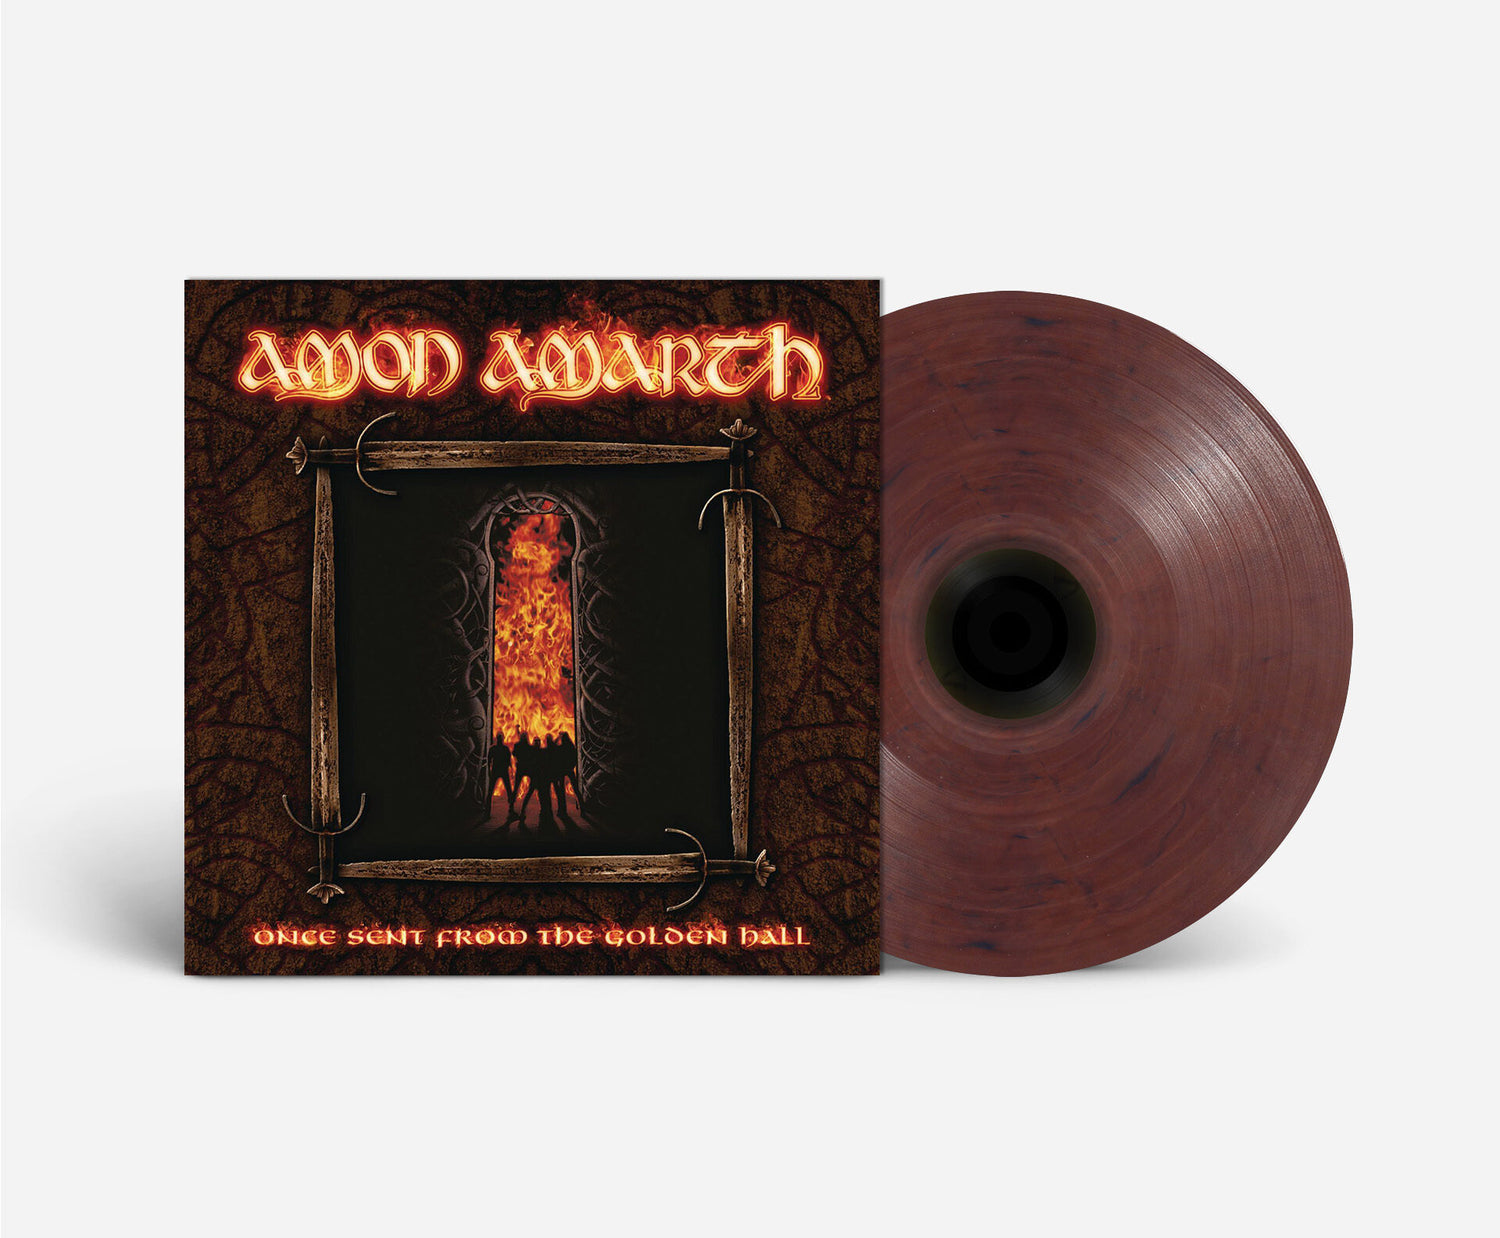 Gimme Metal's Vinyl Club celebrate the debut of Amon Amarth with the reissue of  "Once Sent From the Golden Hall'